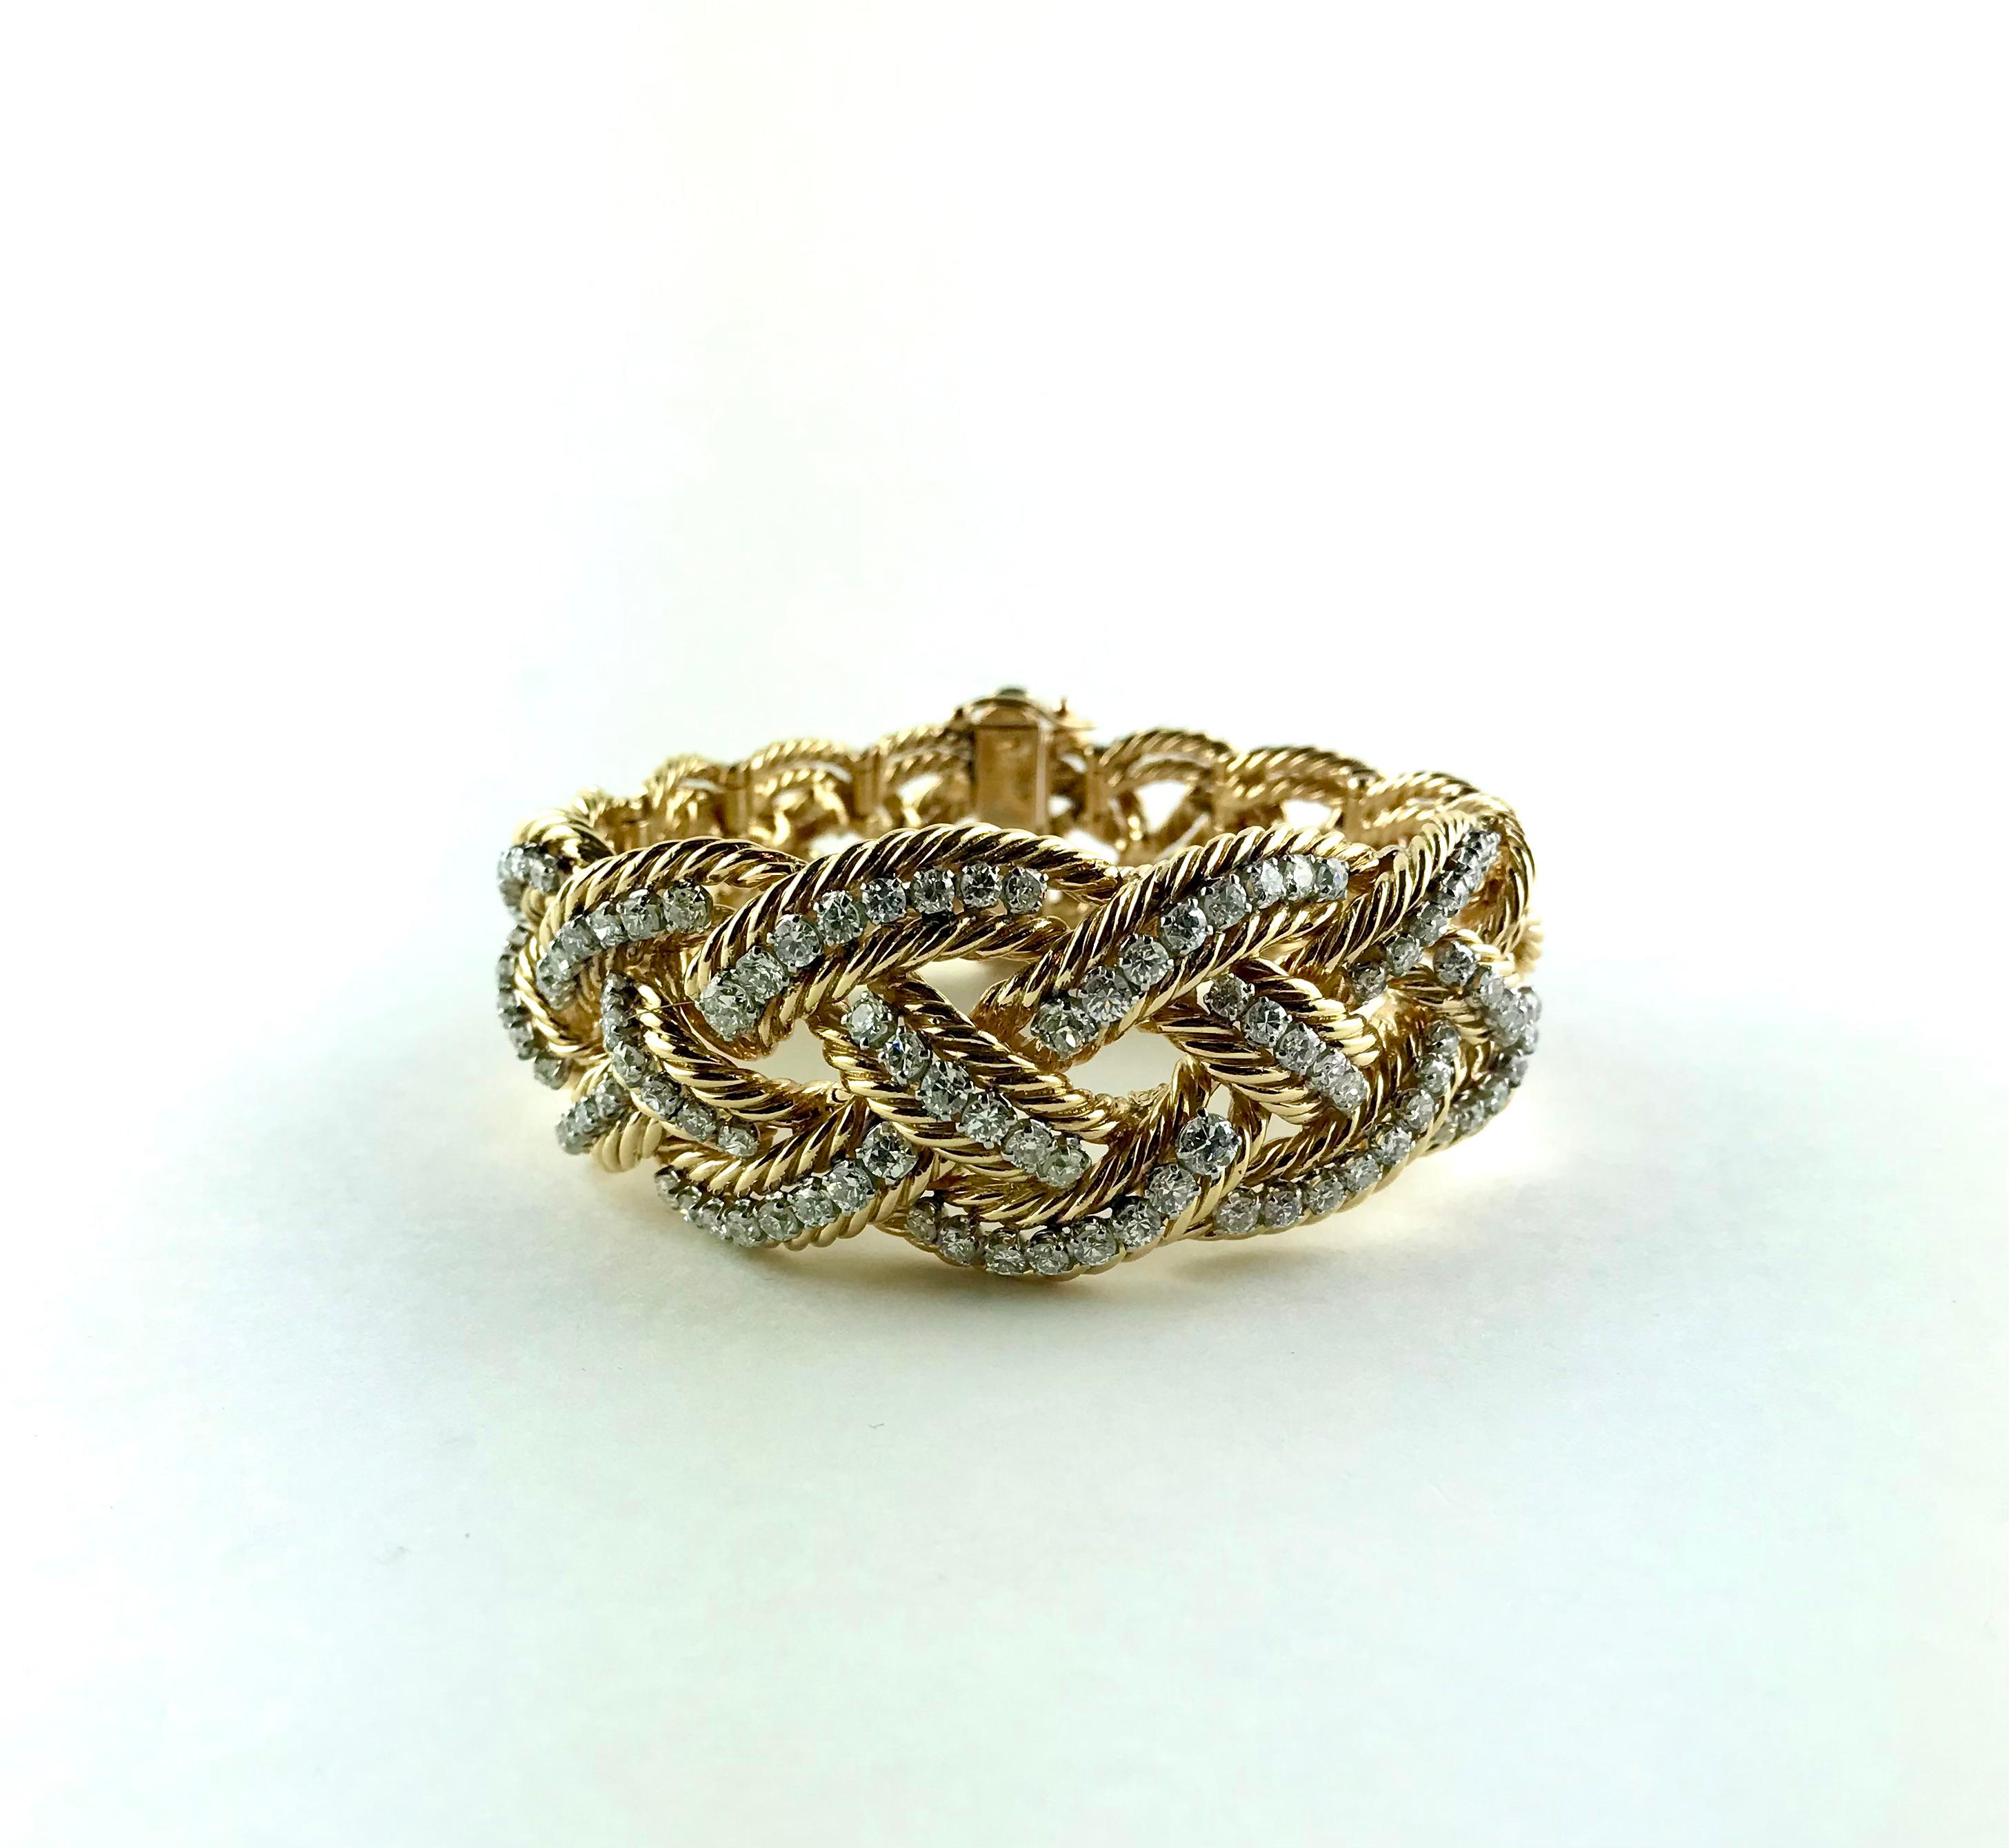 Extremely chic 1960's French 18 karat Yellow Gold and Platinum Bracelet with Diamonds signed by Boucheron.
Designed as braided segments of twisted Yellow Gold rope, enlighted across the top with 7 cts prong-set arcs of high quality round-cut